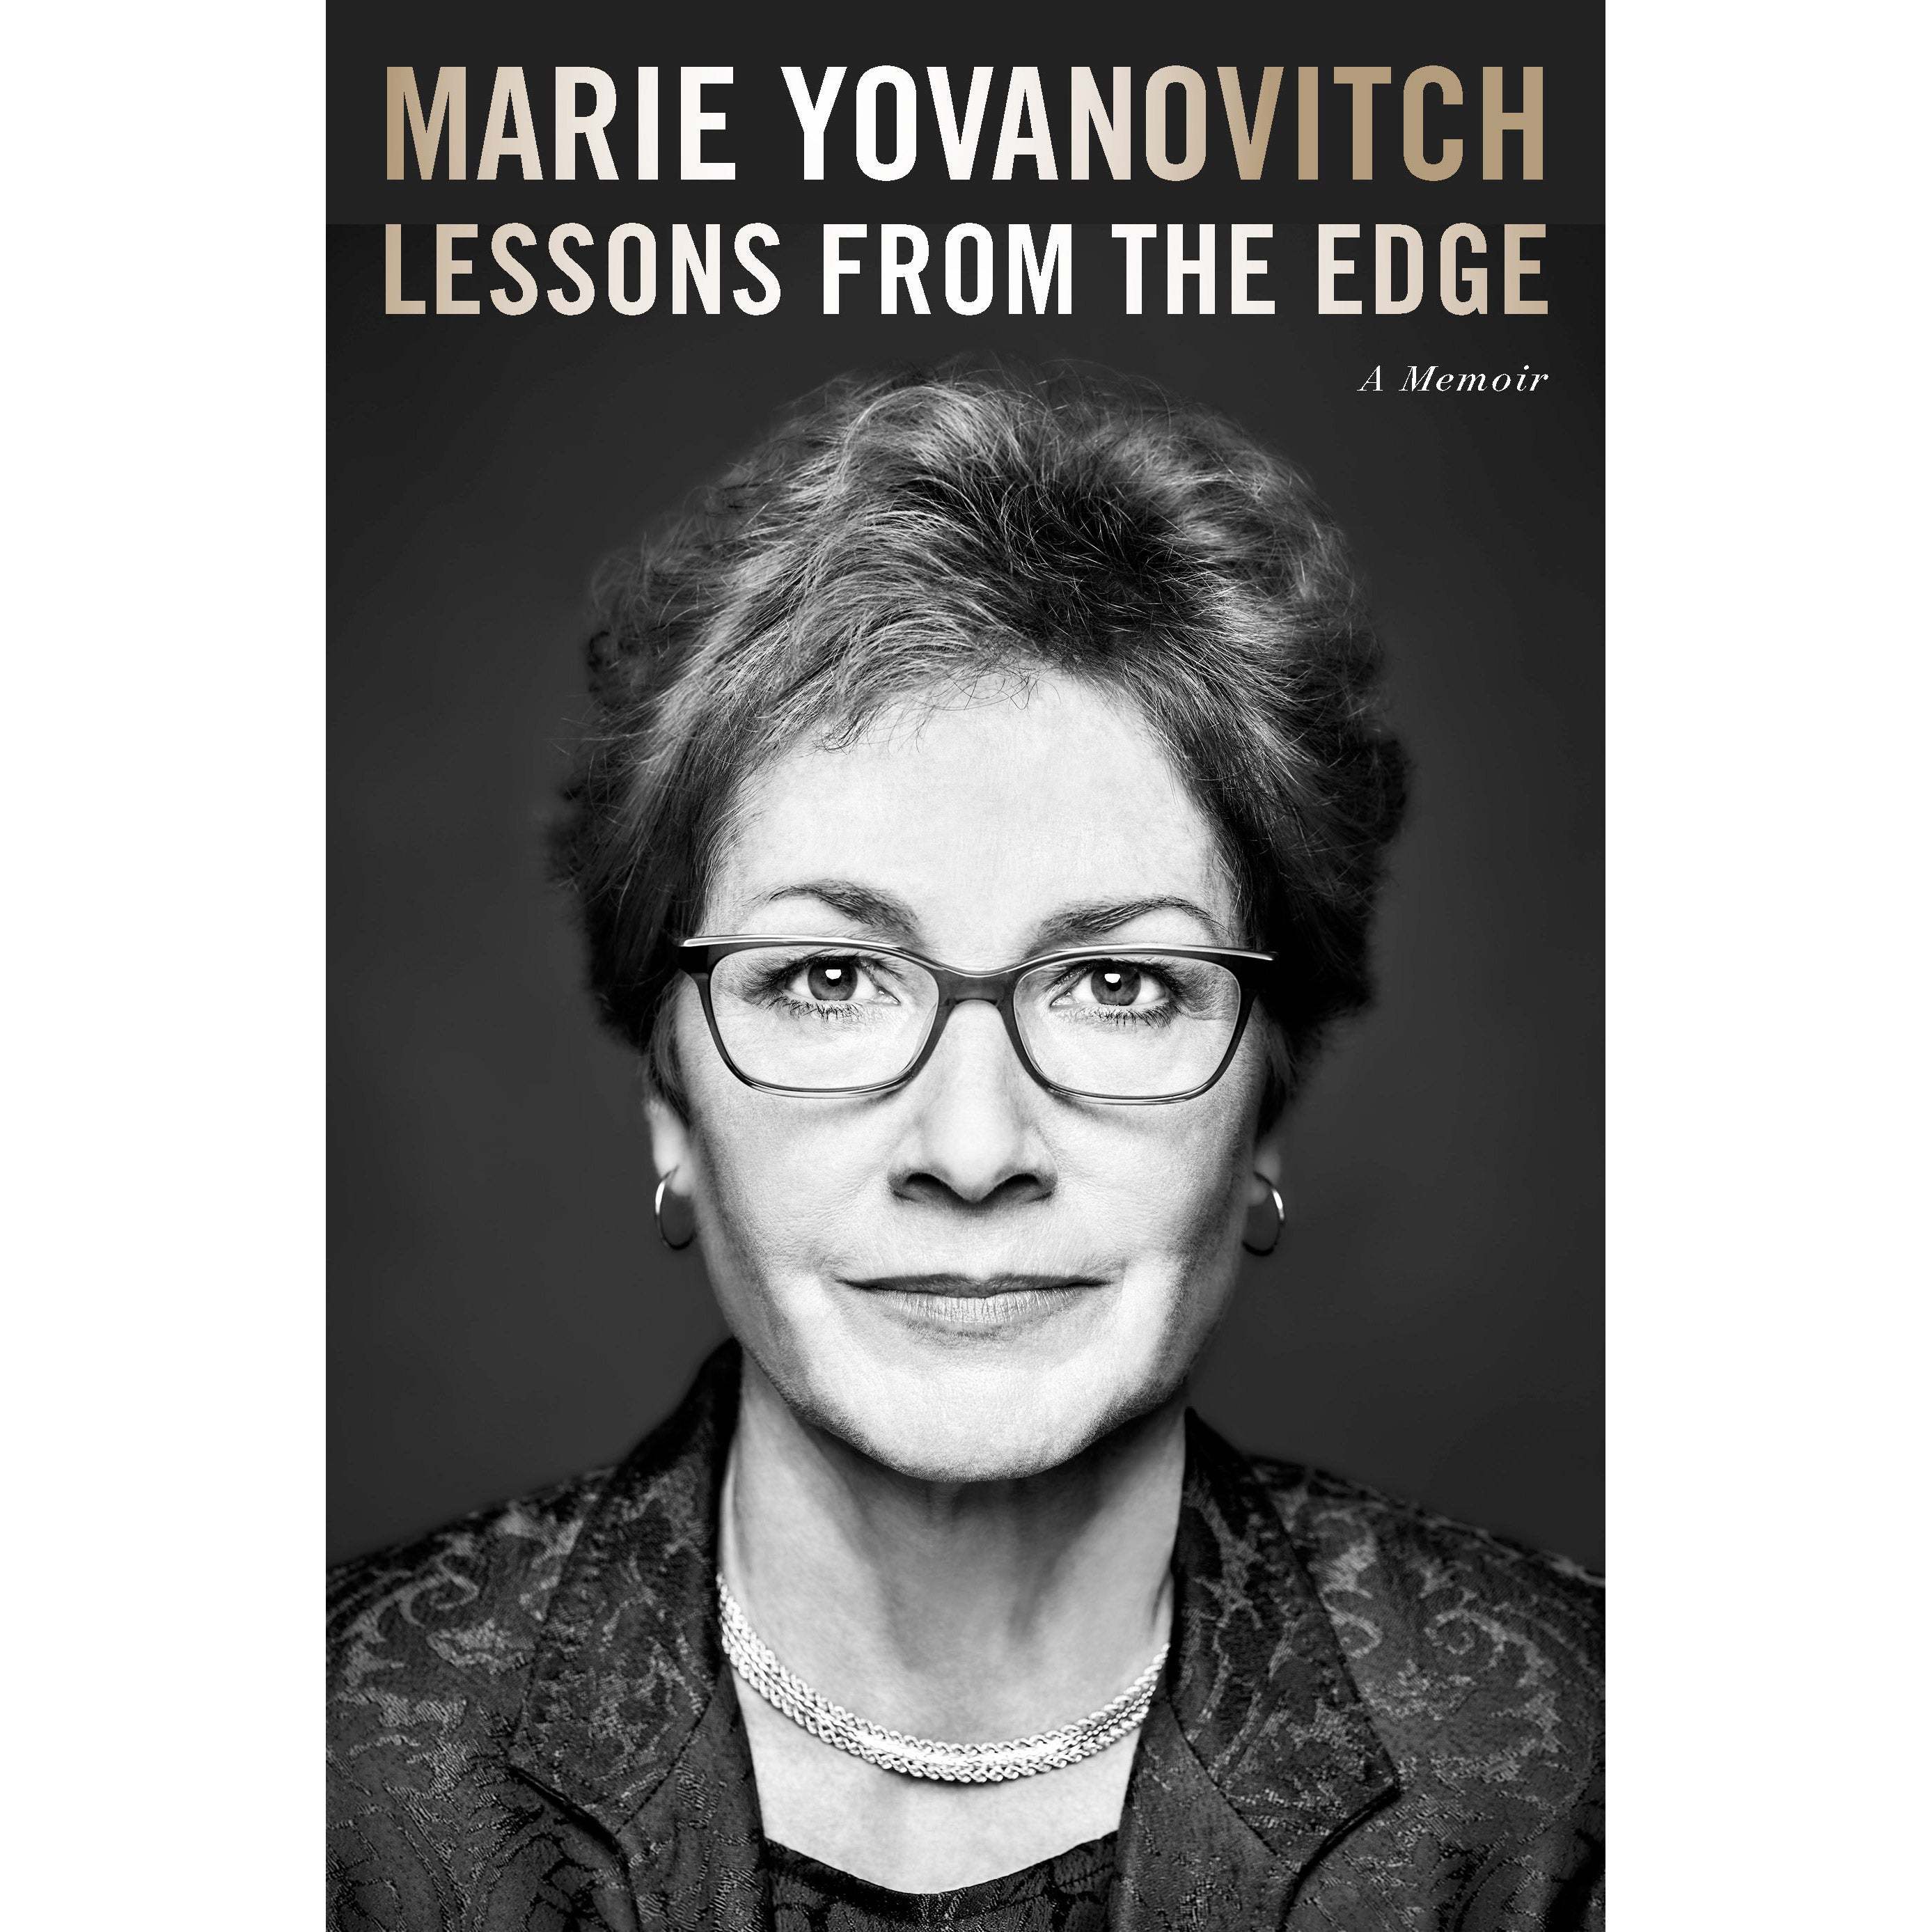 The cover of Lessons From the Edge.